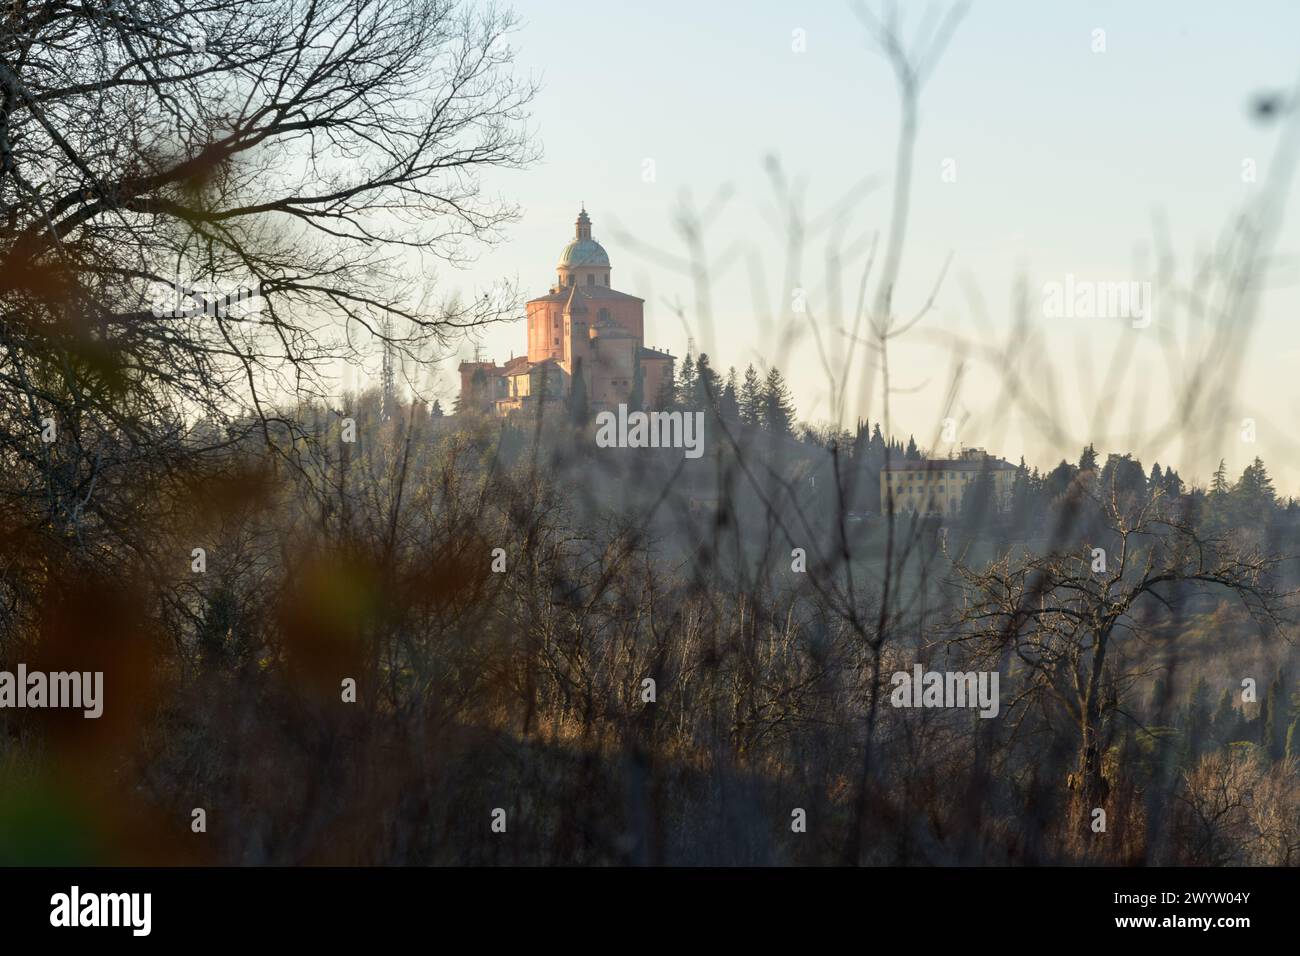 Evening view of ancient sanctuary of the Madonna di San Luca through the branches of the trees. Bologna, Emilia-Romagna, Italy Stock Photo